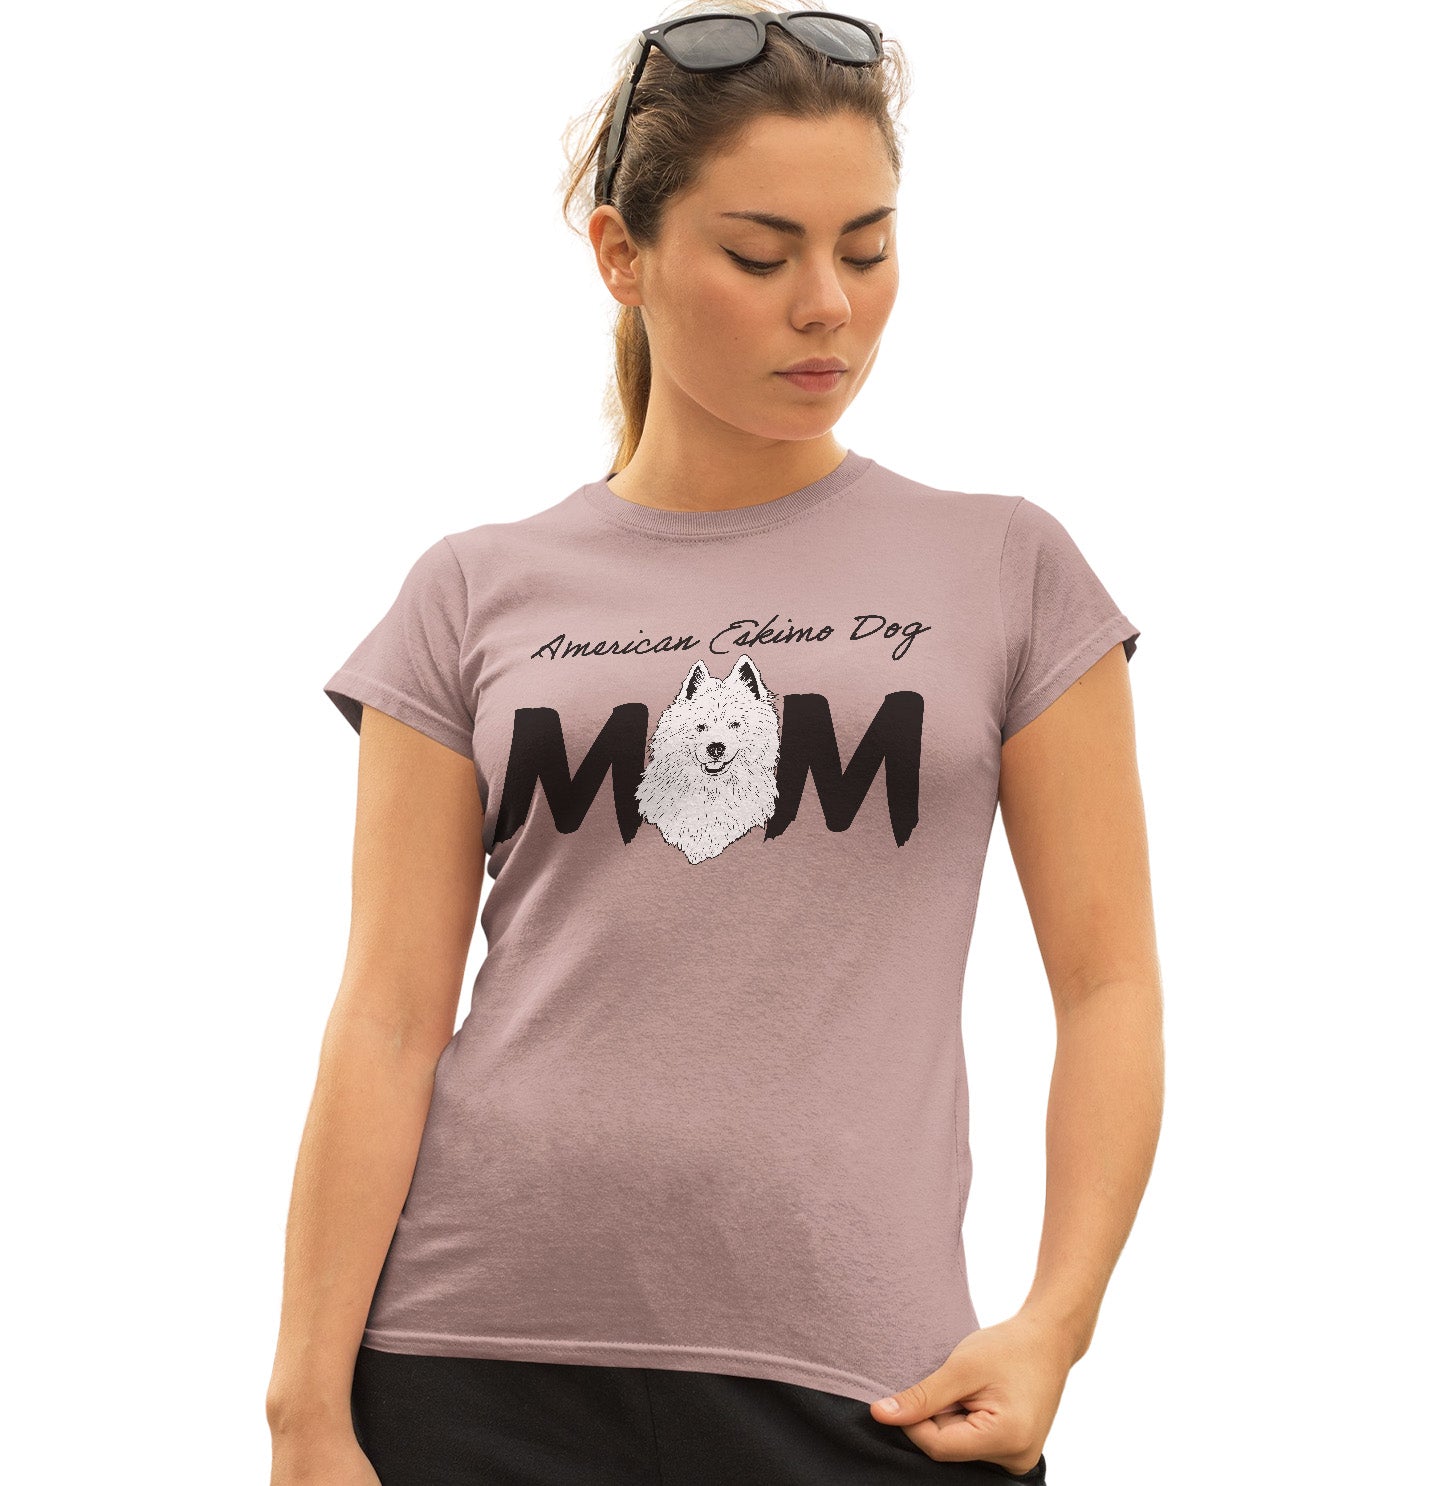 American Eskimo Dog Breed Mom - Women's Fitted T-Shirt